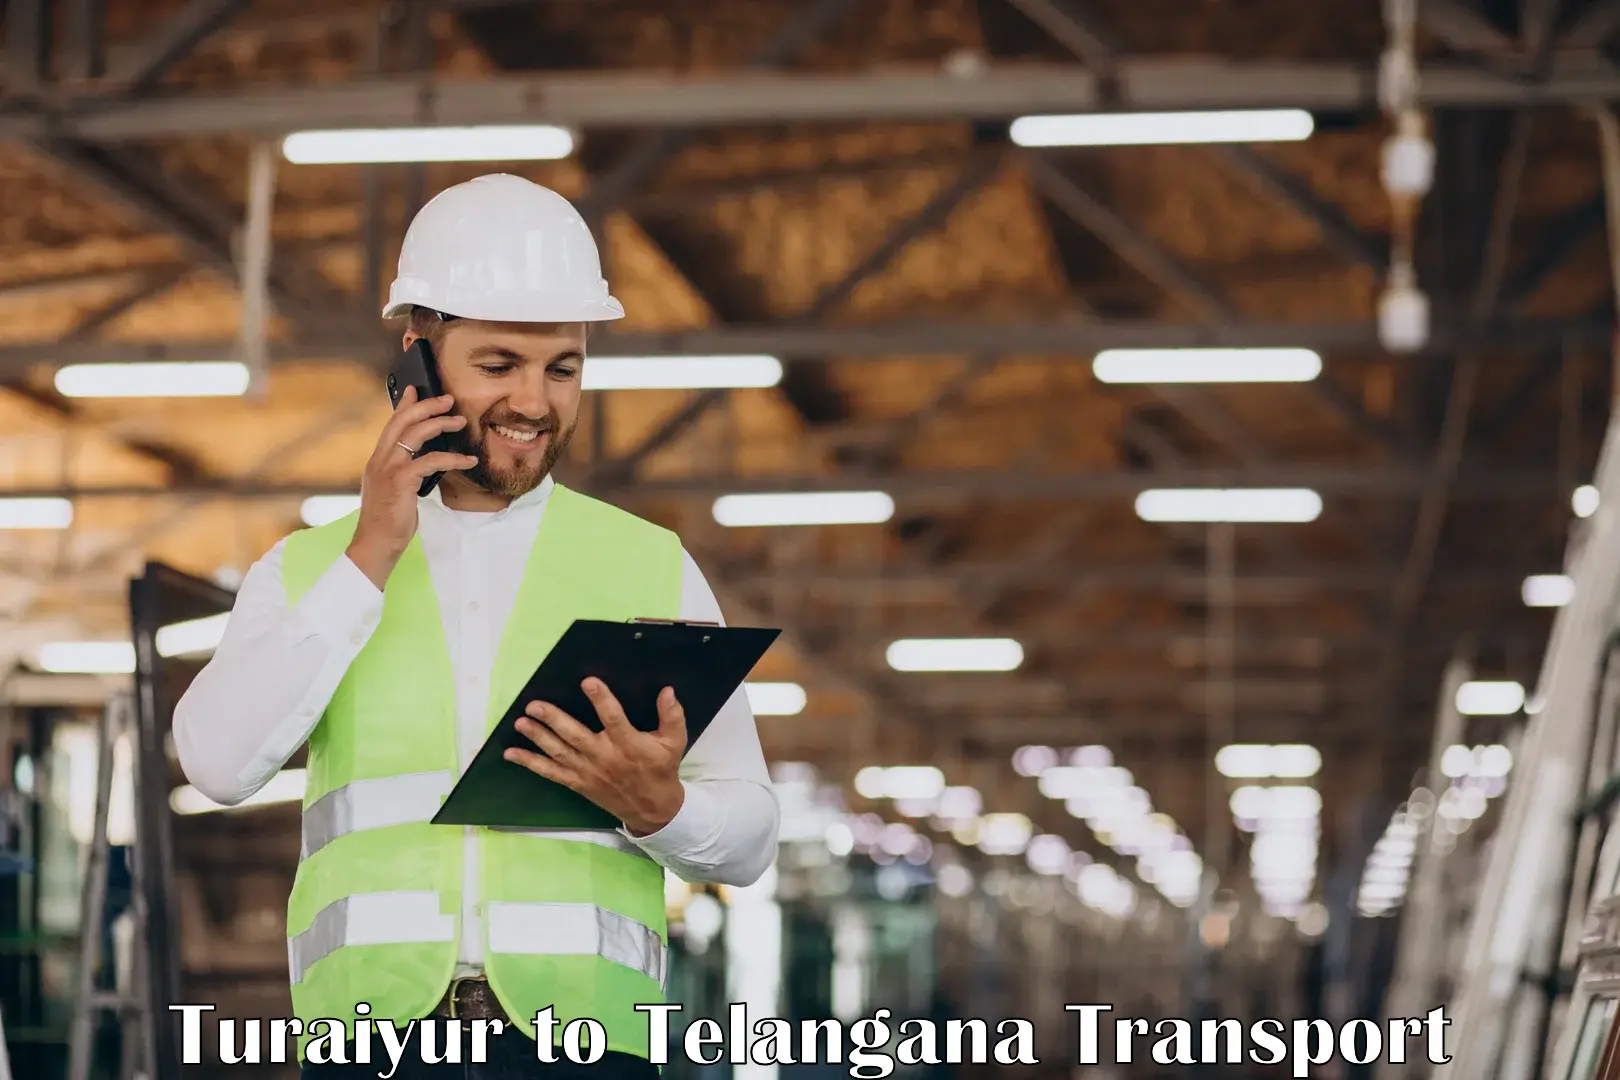 Vehicle transport services Turaiyur to Mogulla Pally